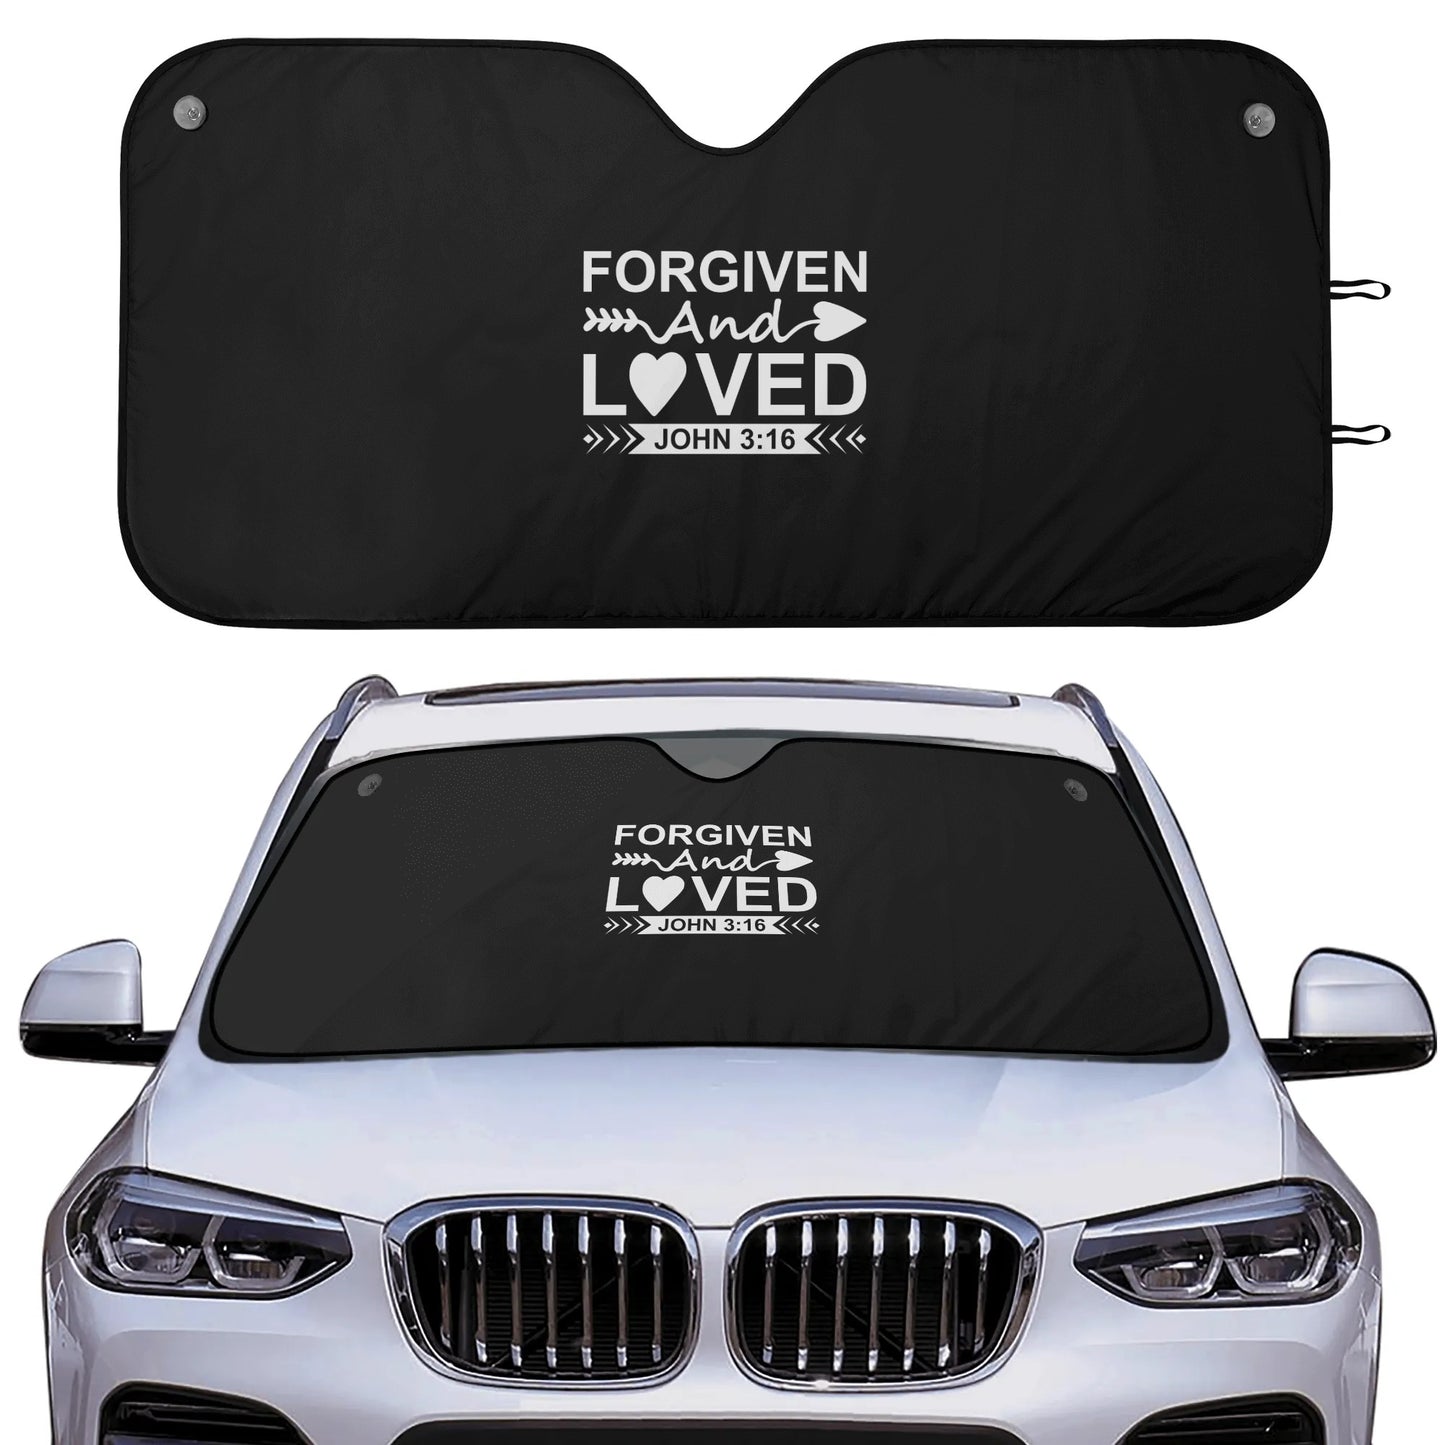 Forgiven & Loved Car Sunshade Christian Car Accessories popcustoms